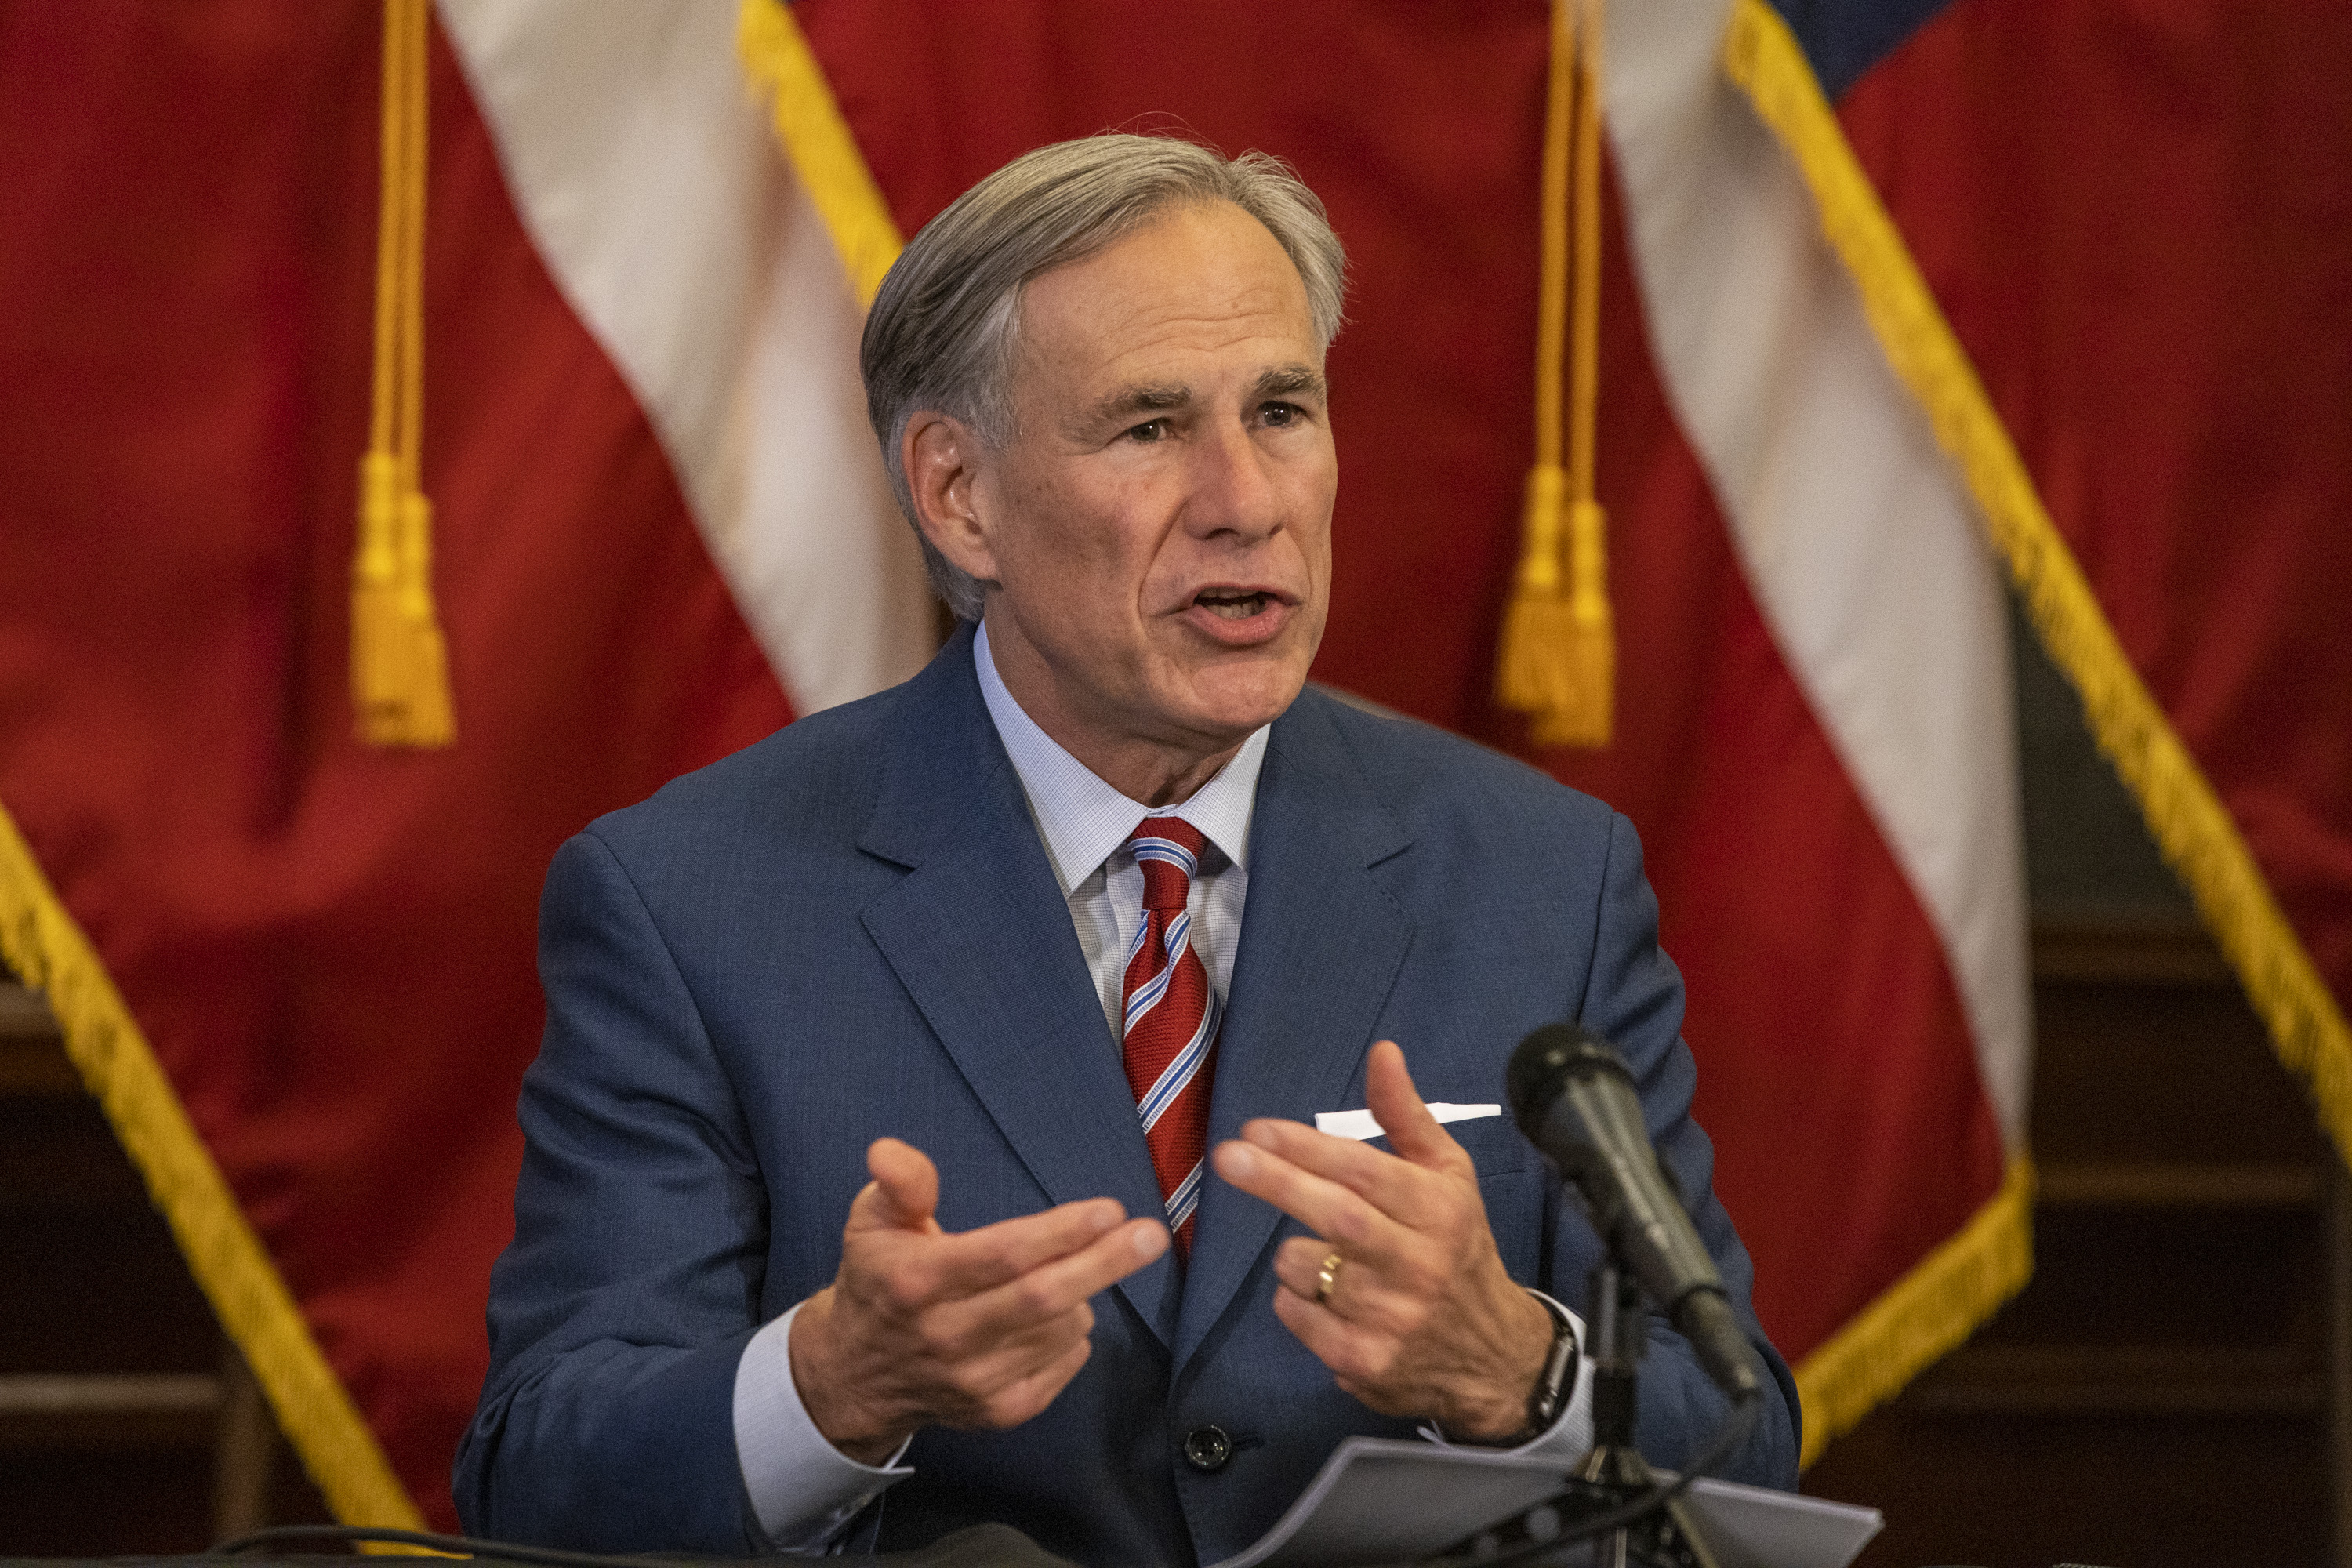 Greg Abbott blames Texas power cuts for green energy, but the state depends on gas